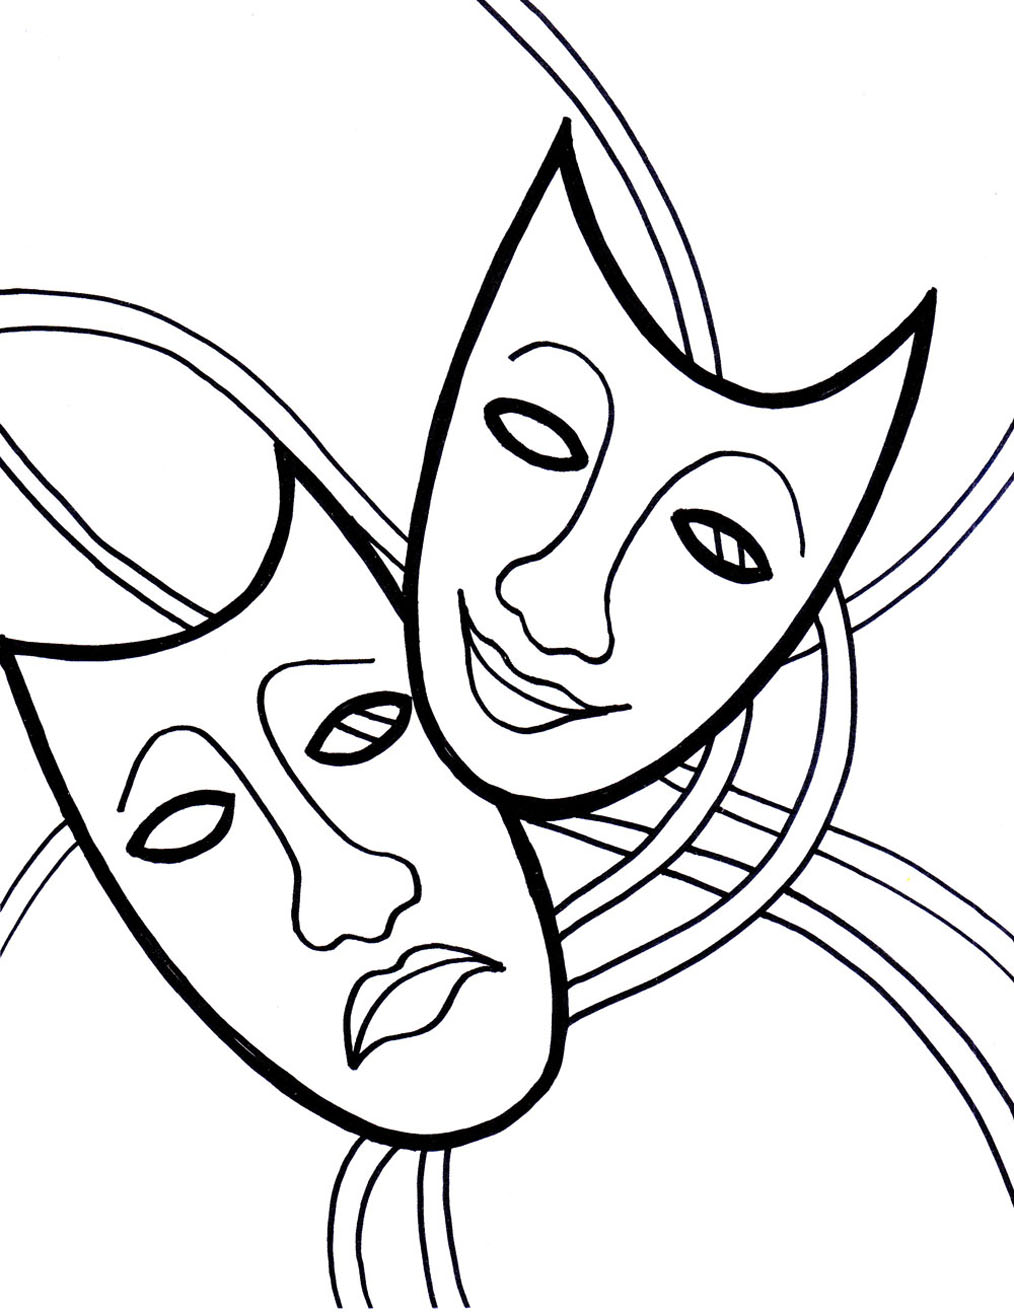 Carnival image to download and color - Carnival Kids Coloring Pages